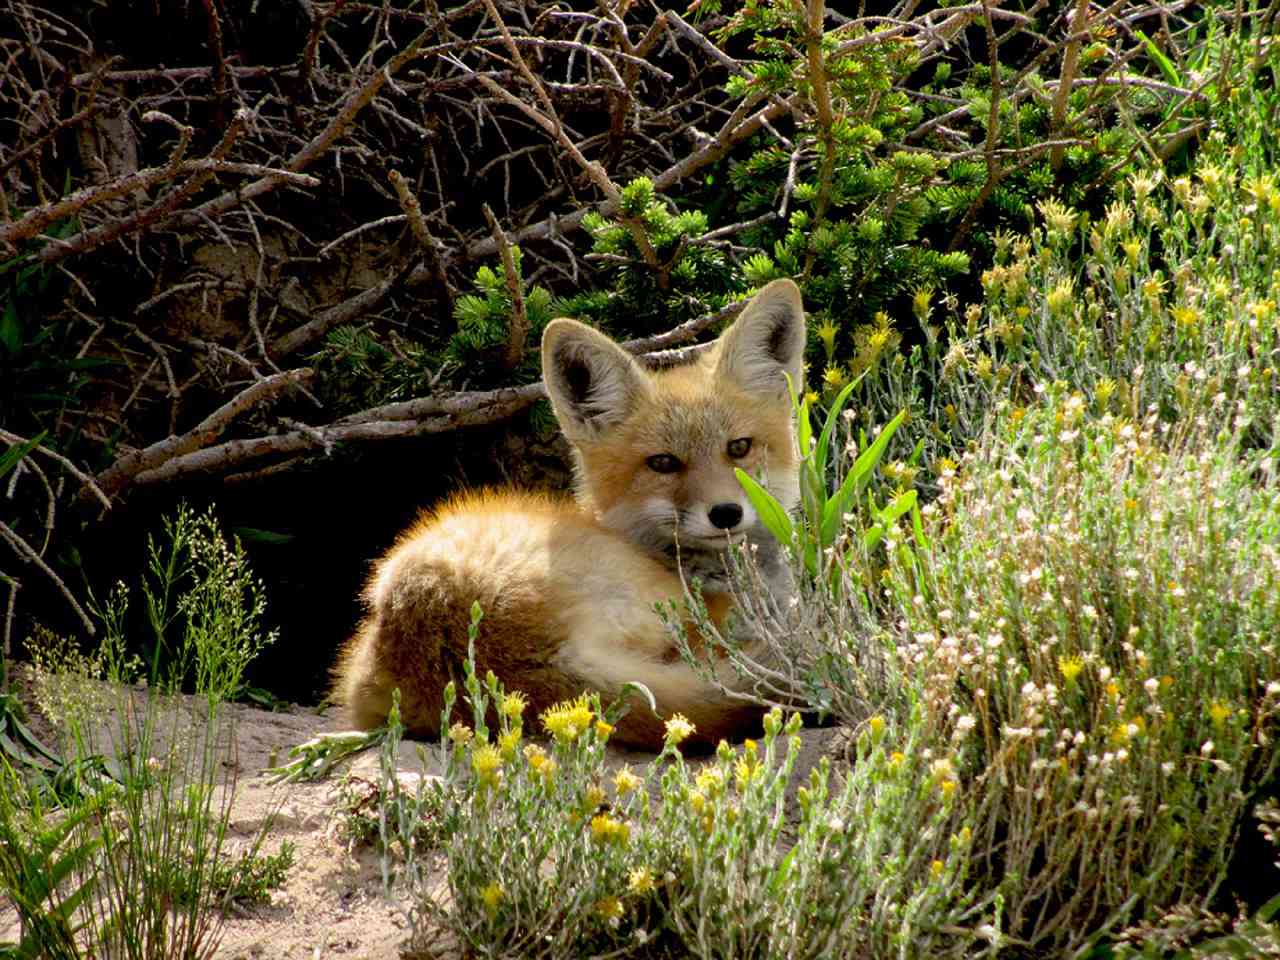 A baby red fox resting next to flowers.